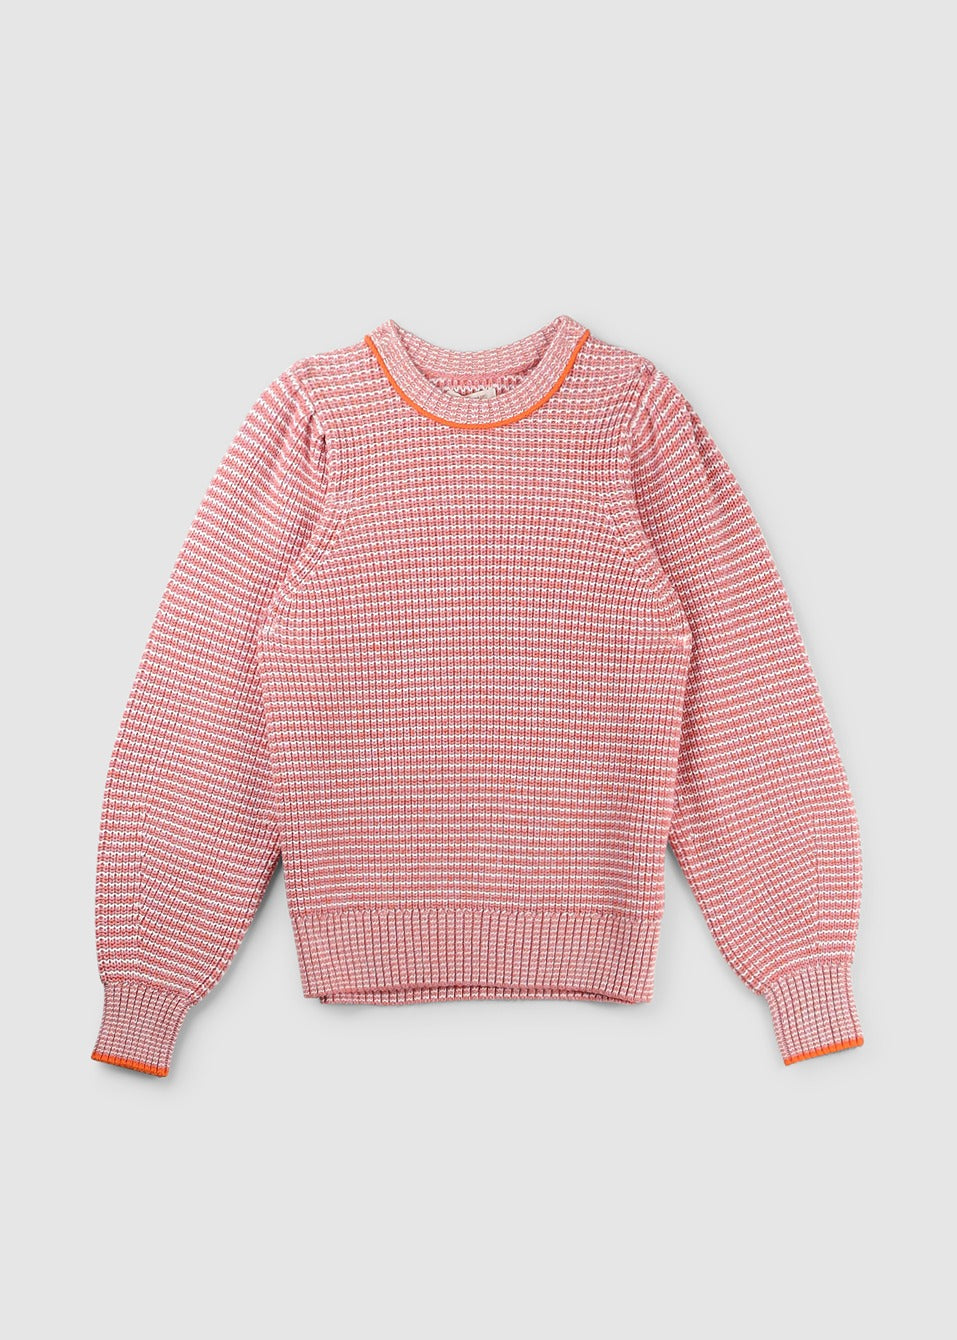 Image of Barbour Womens Snapdragon Knit Jumper In Multi